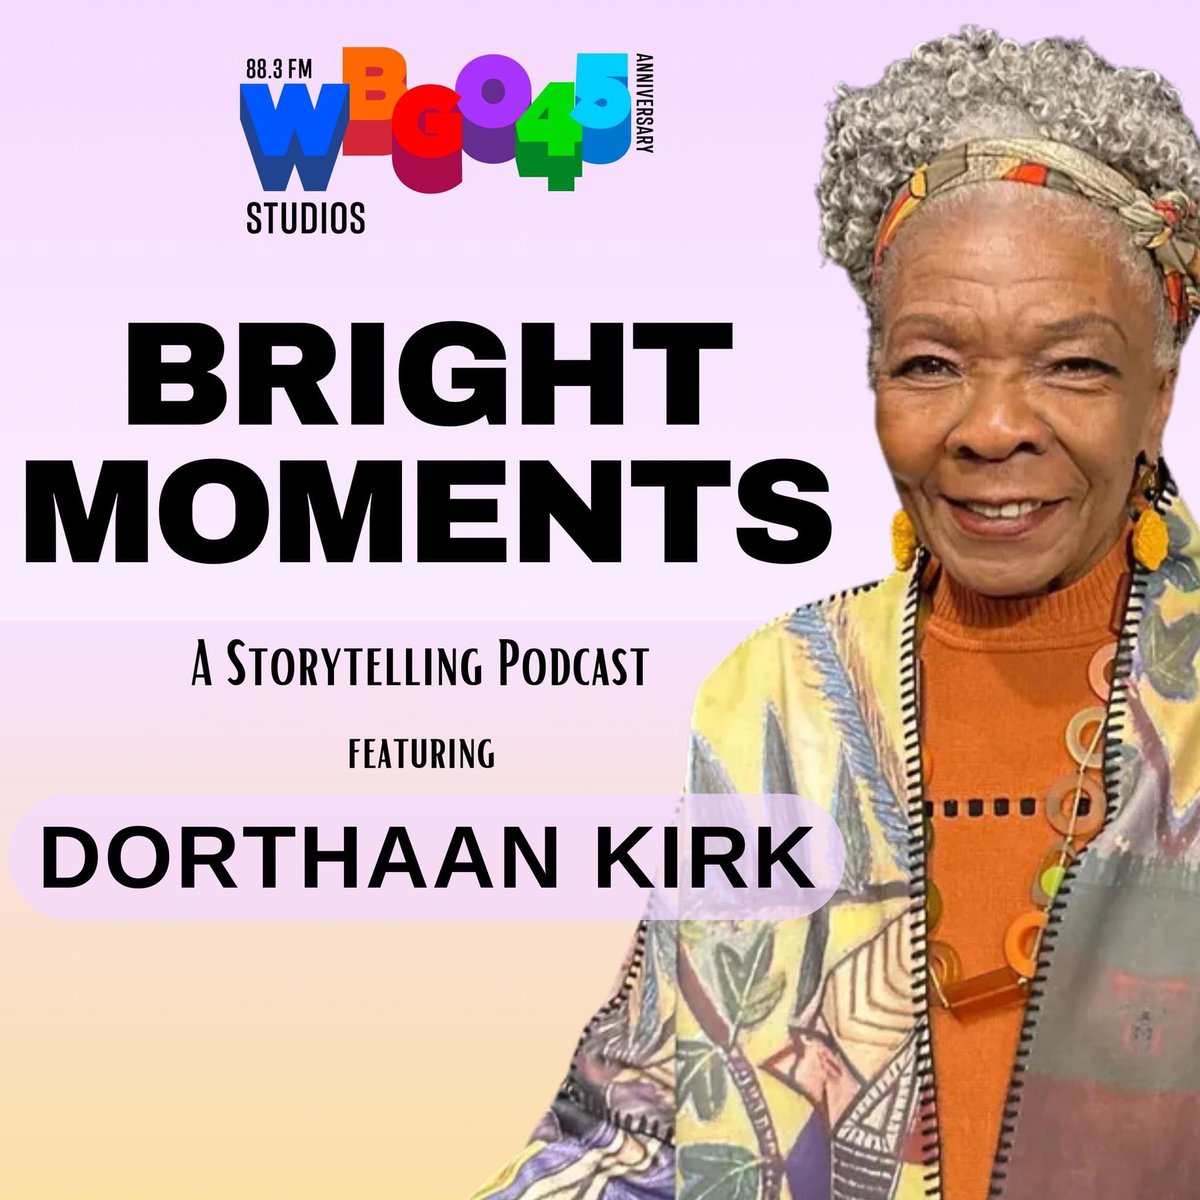 #JAZZ HEADS, this is for you! I host a story telling podcast called Bright Moments featuring @NEAarts Jazz Master Dorthaan Kirk. Listen and Subscribe to hear the story behind this iconic photo w Amiri and Amina Baraka, Nina Simone & Abbey Lincoln. subscribe where u listen!